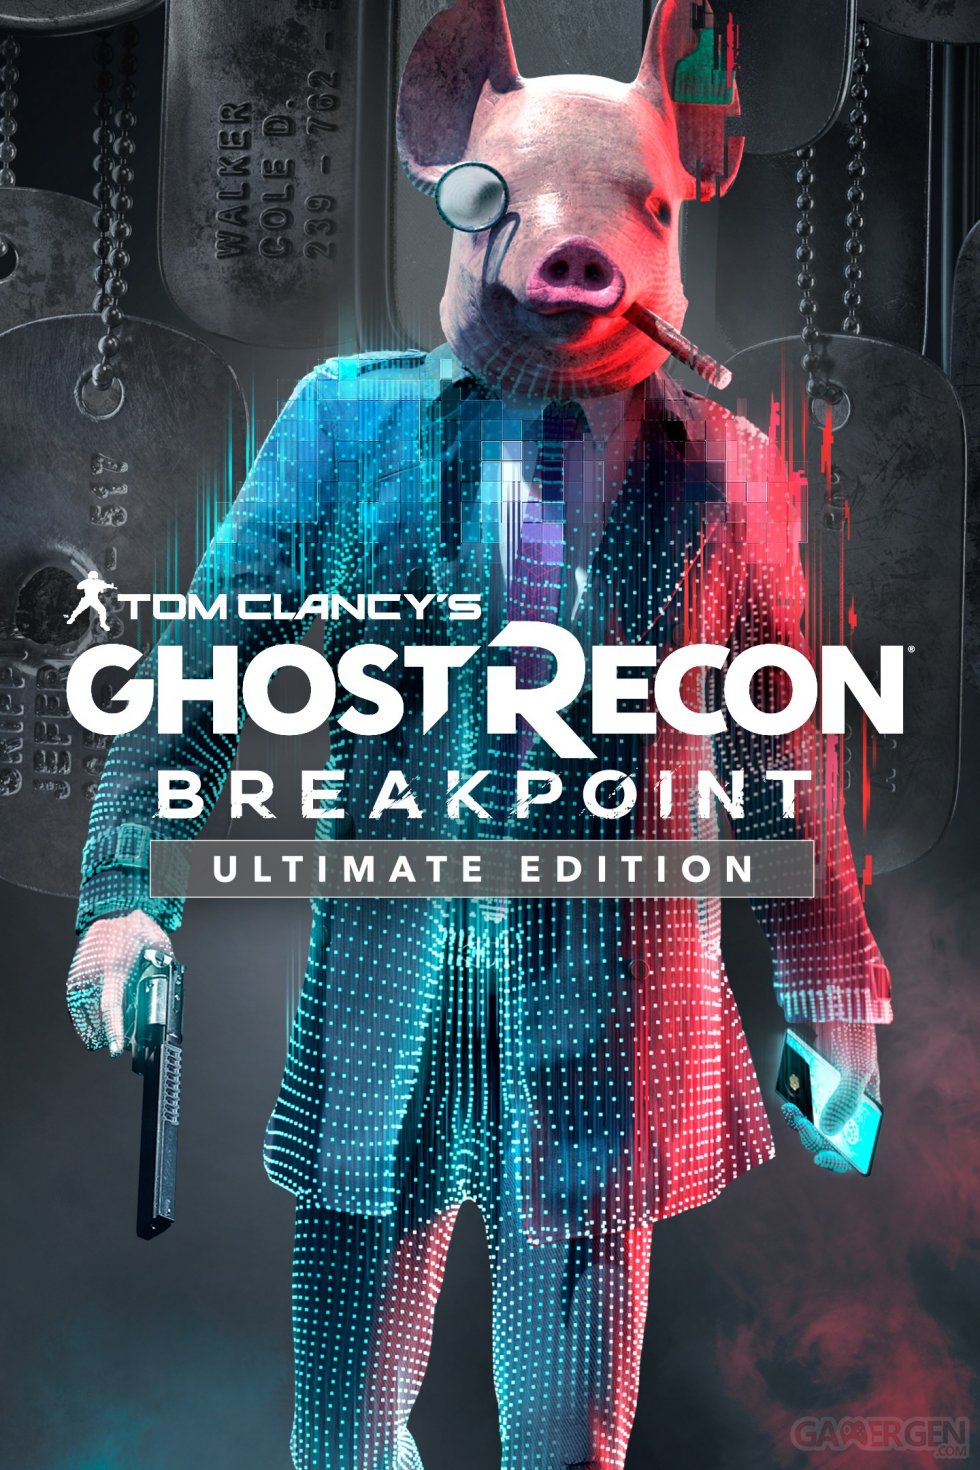 Watch-Dogs-Legion_jaquette-piratée_hacked-cover-art_Ghost-Recon-Breakpoint